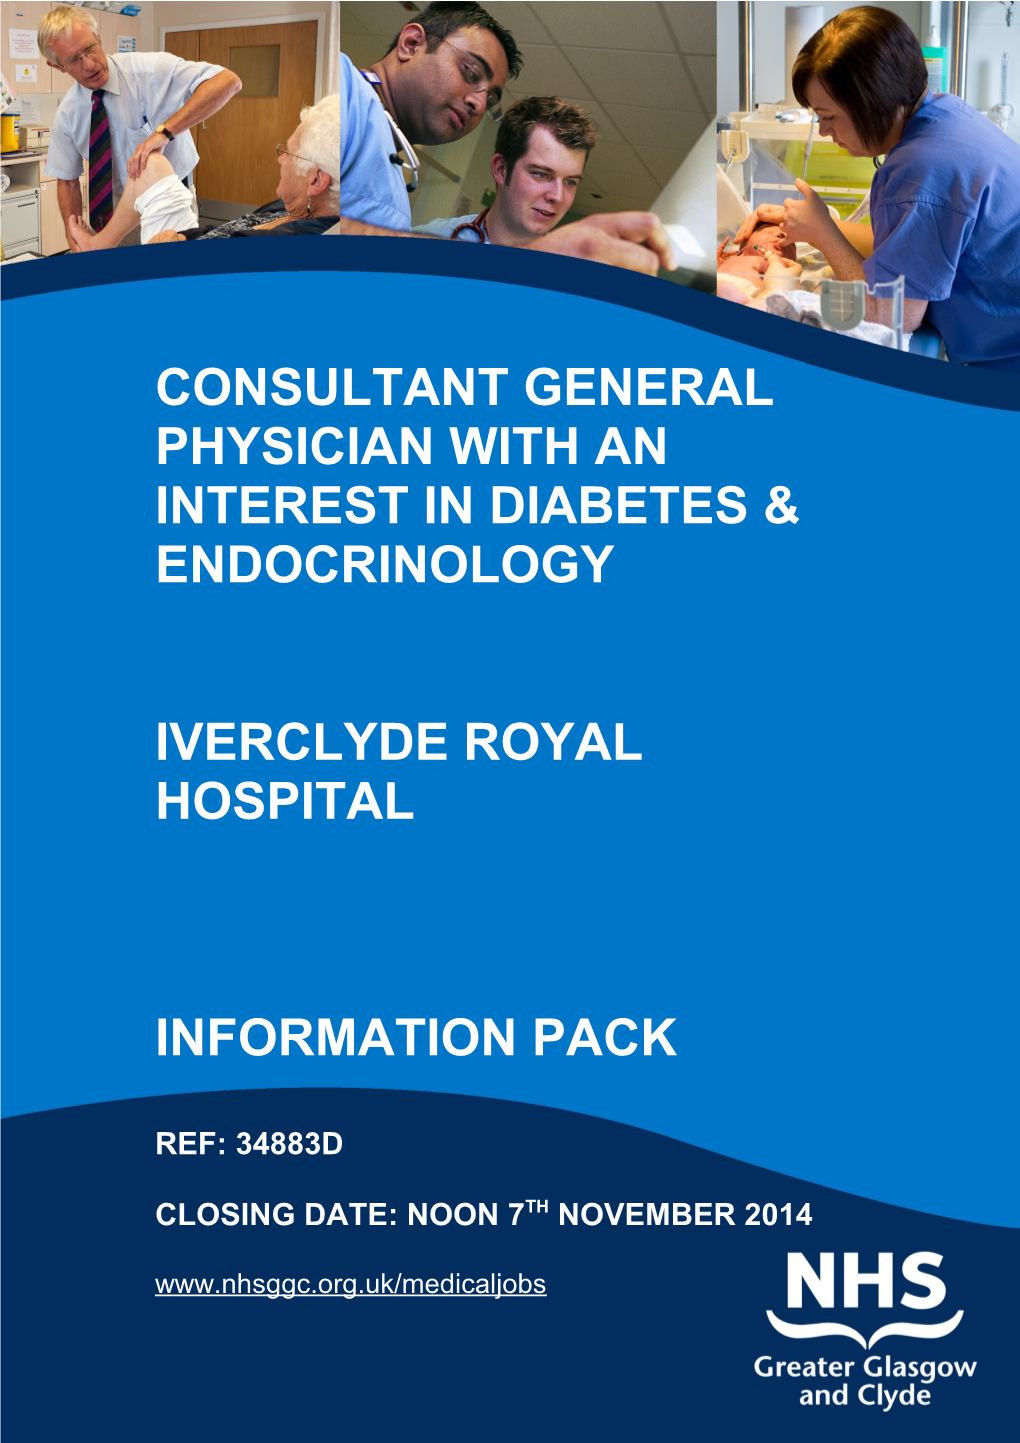 CONSULTANT General Physician with an Interest in Diabetes & Endocrinology